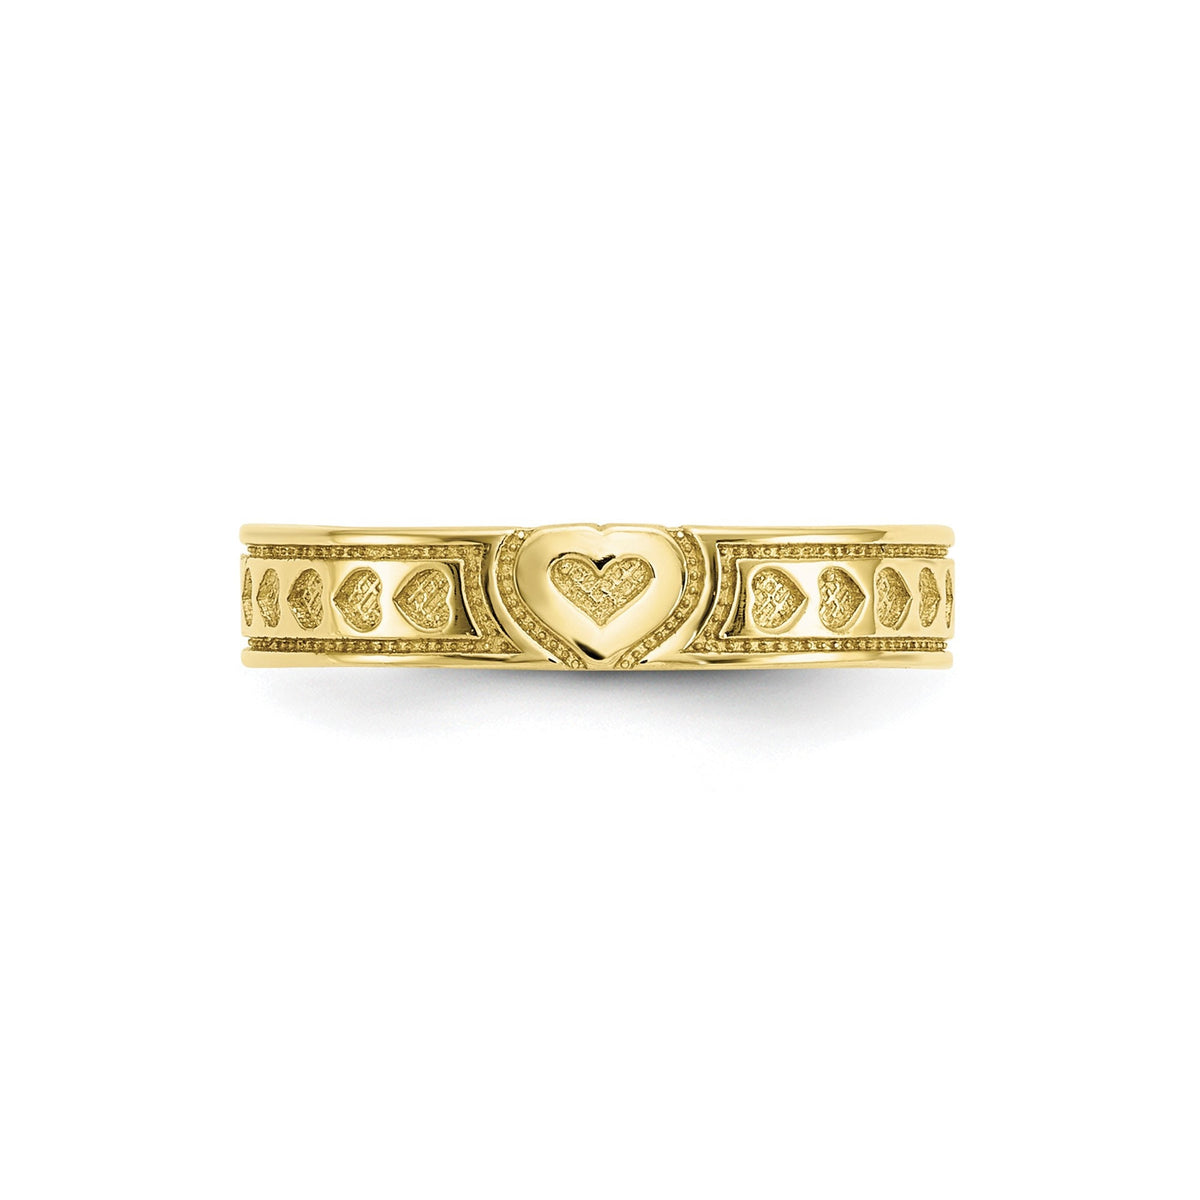 10k Yellow Gold Heart Solid Toe Ring - Gift Box Included - 10k White Gold Toe Ring - Made in USA